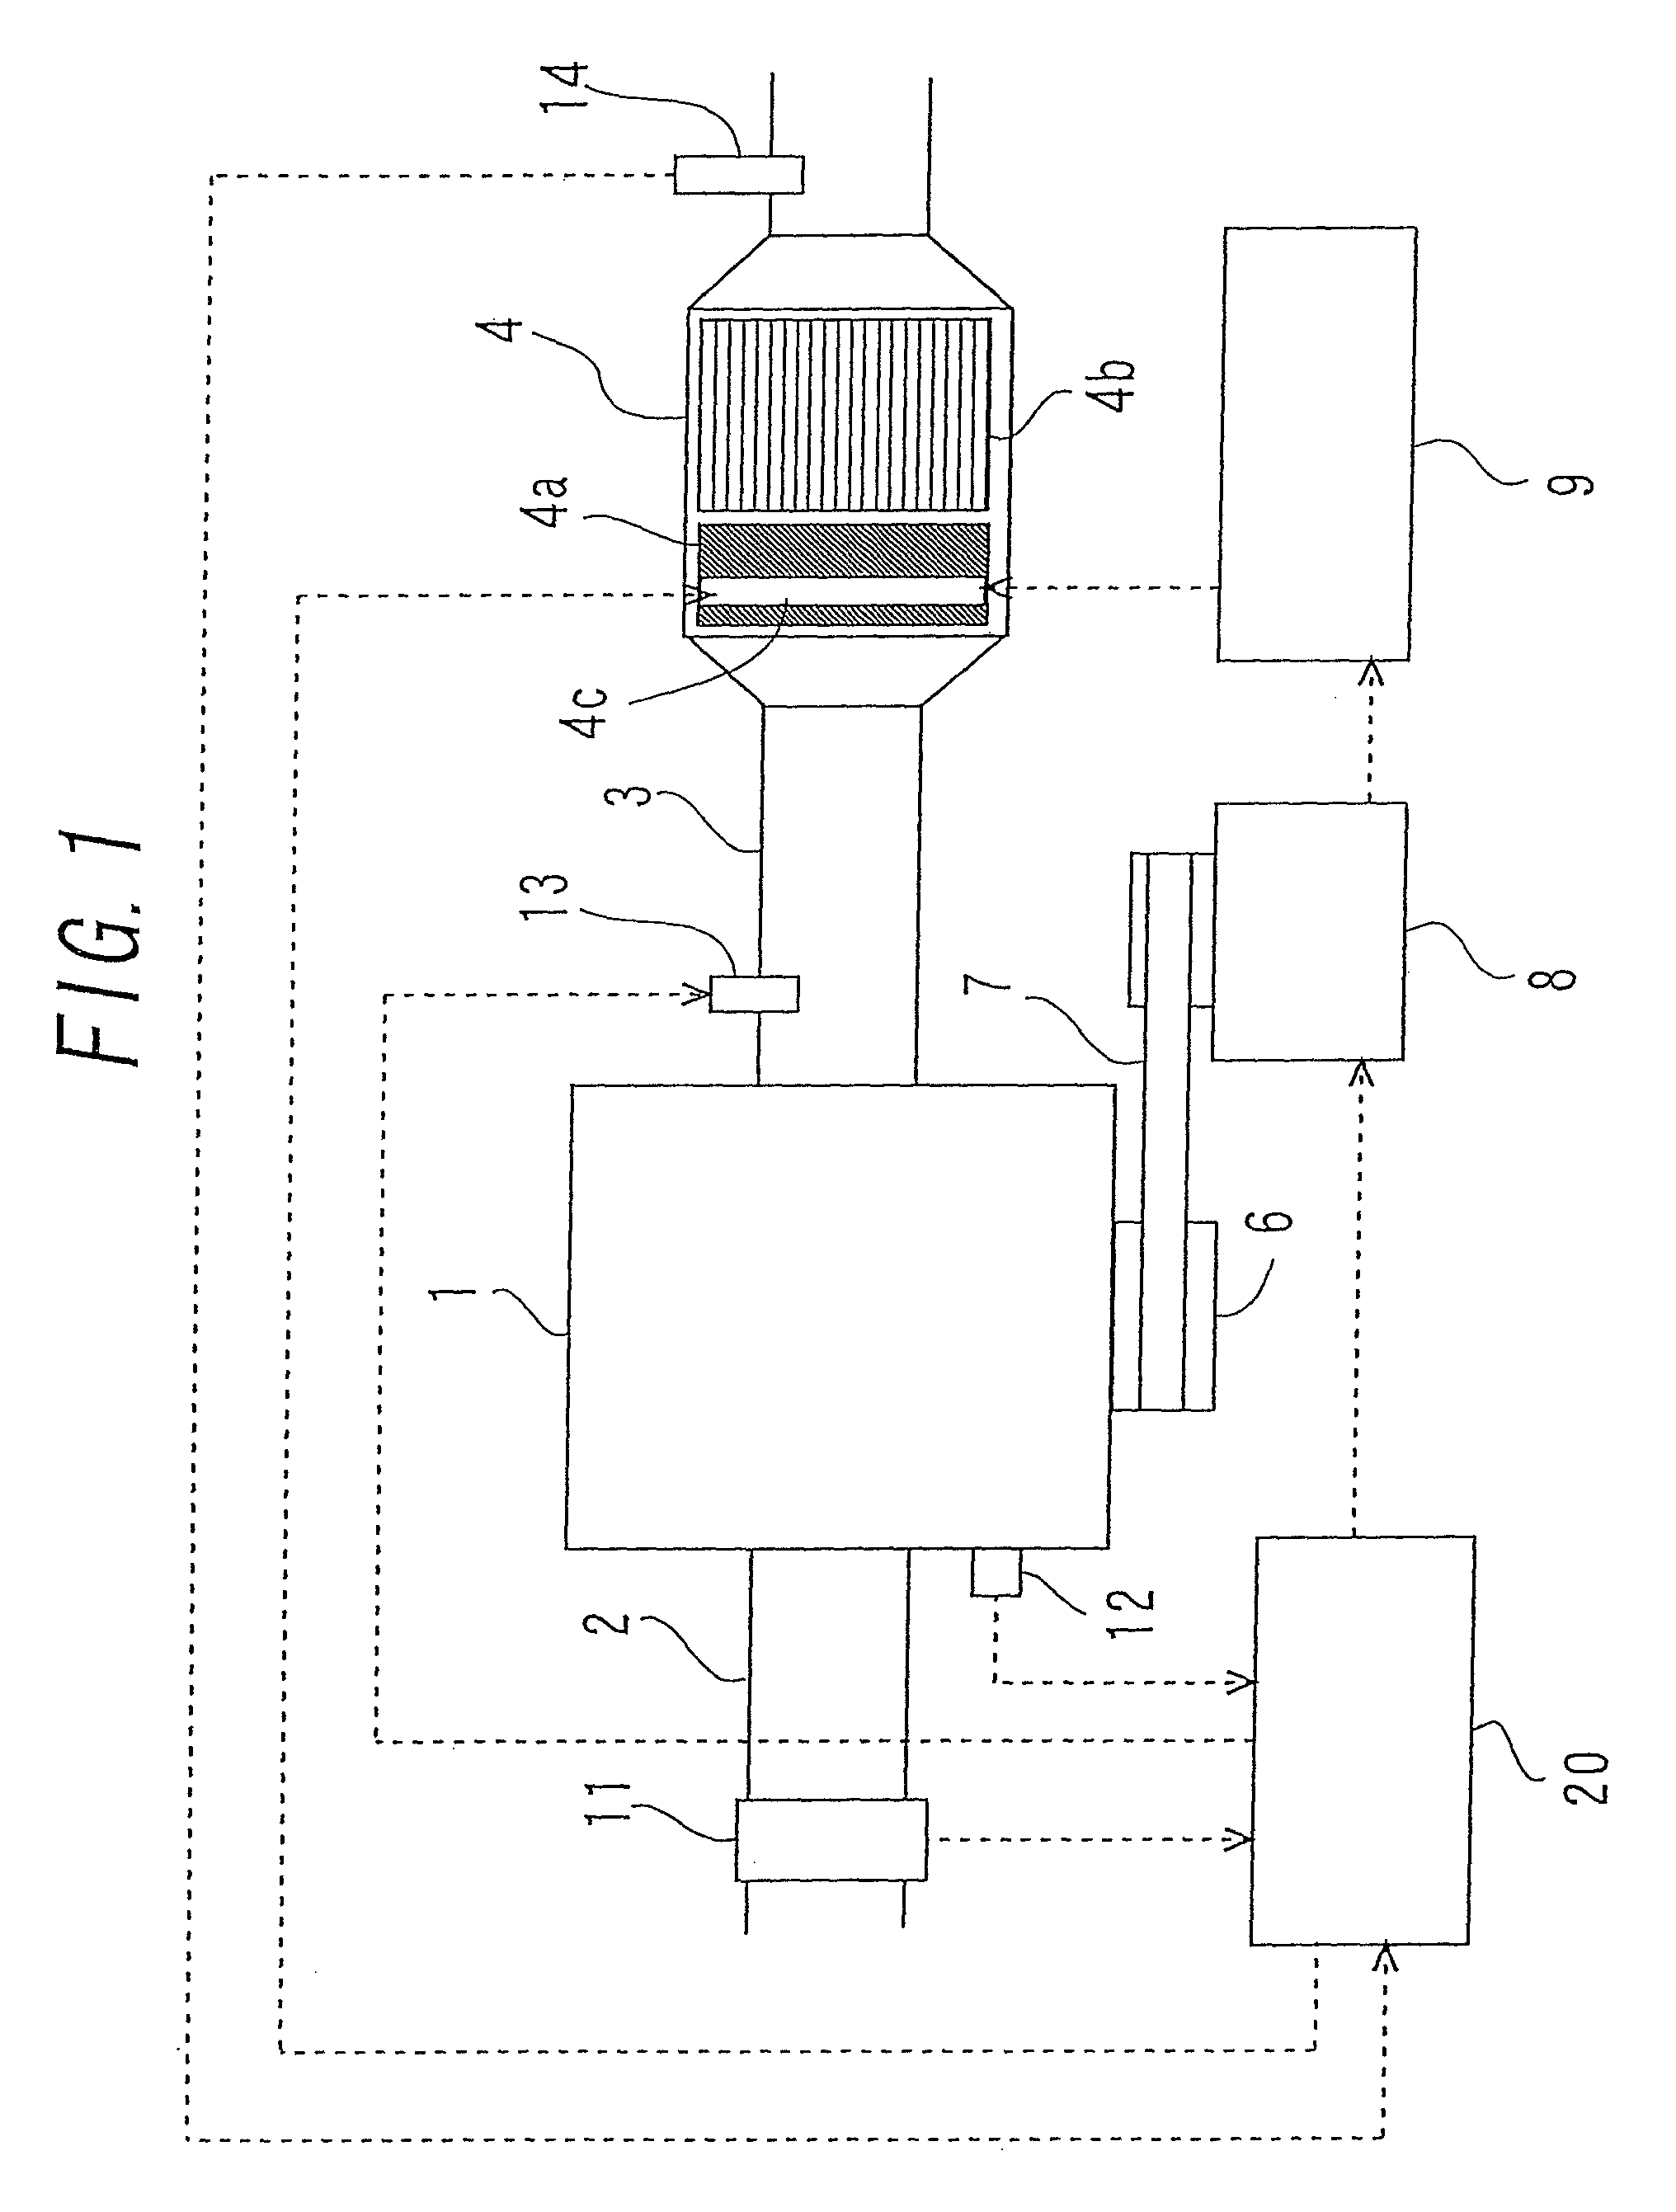 Power source system of internal combustion engine